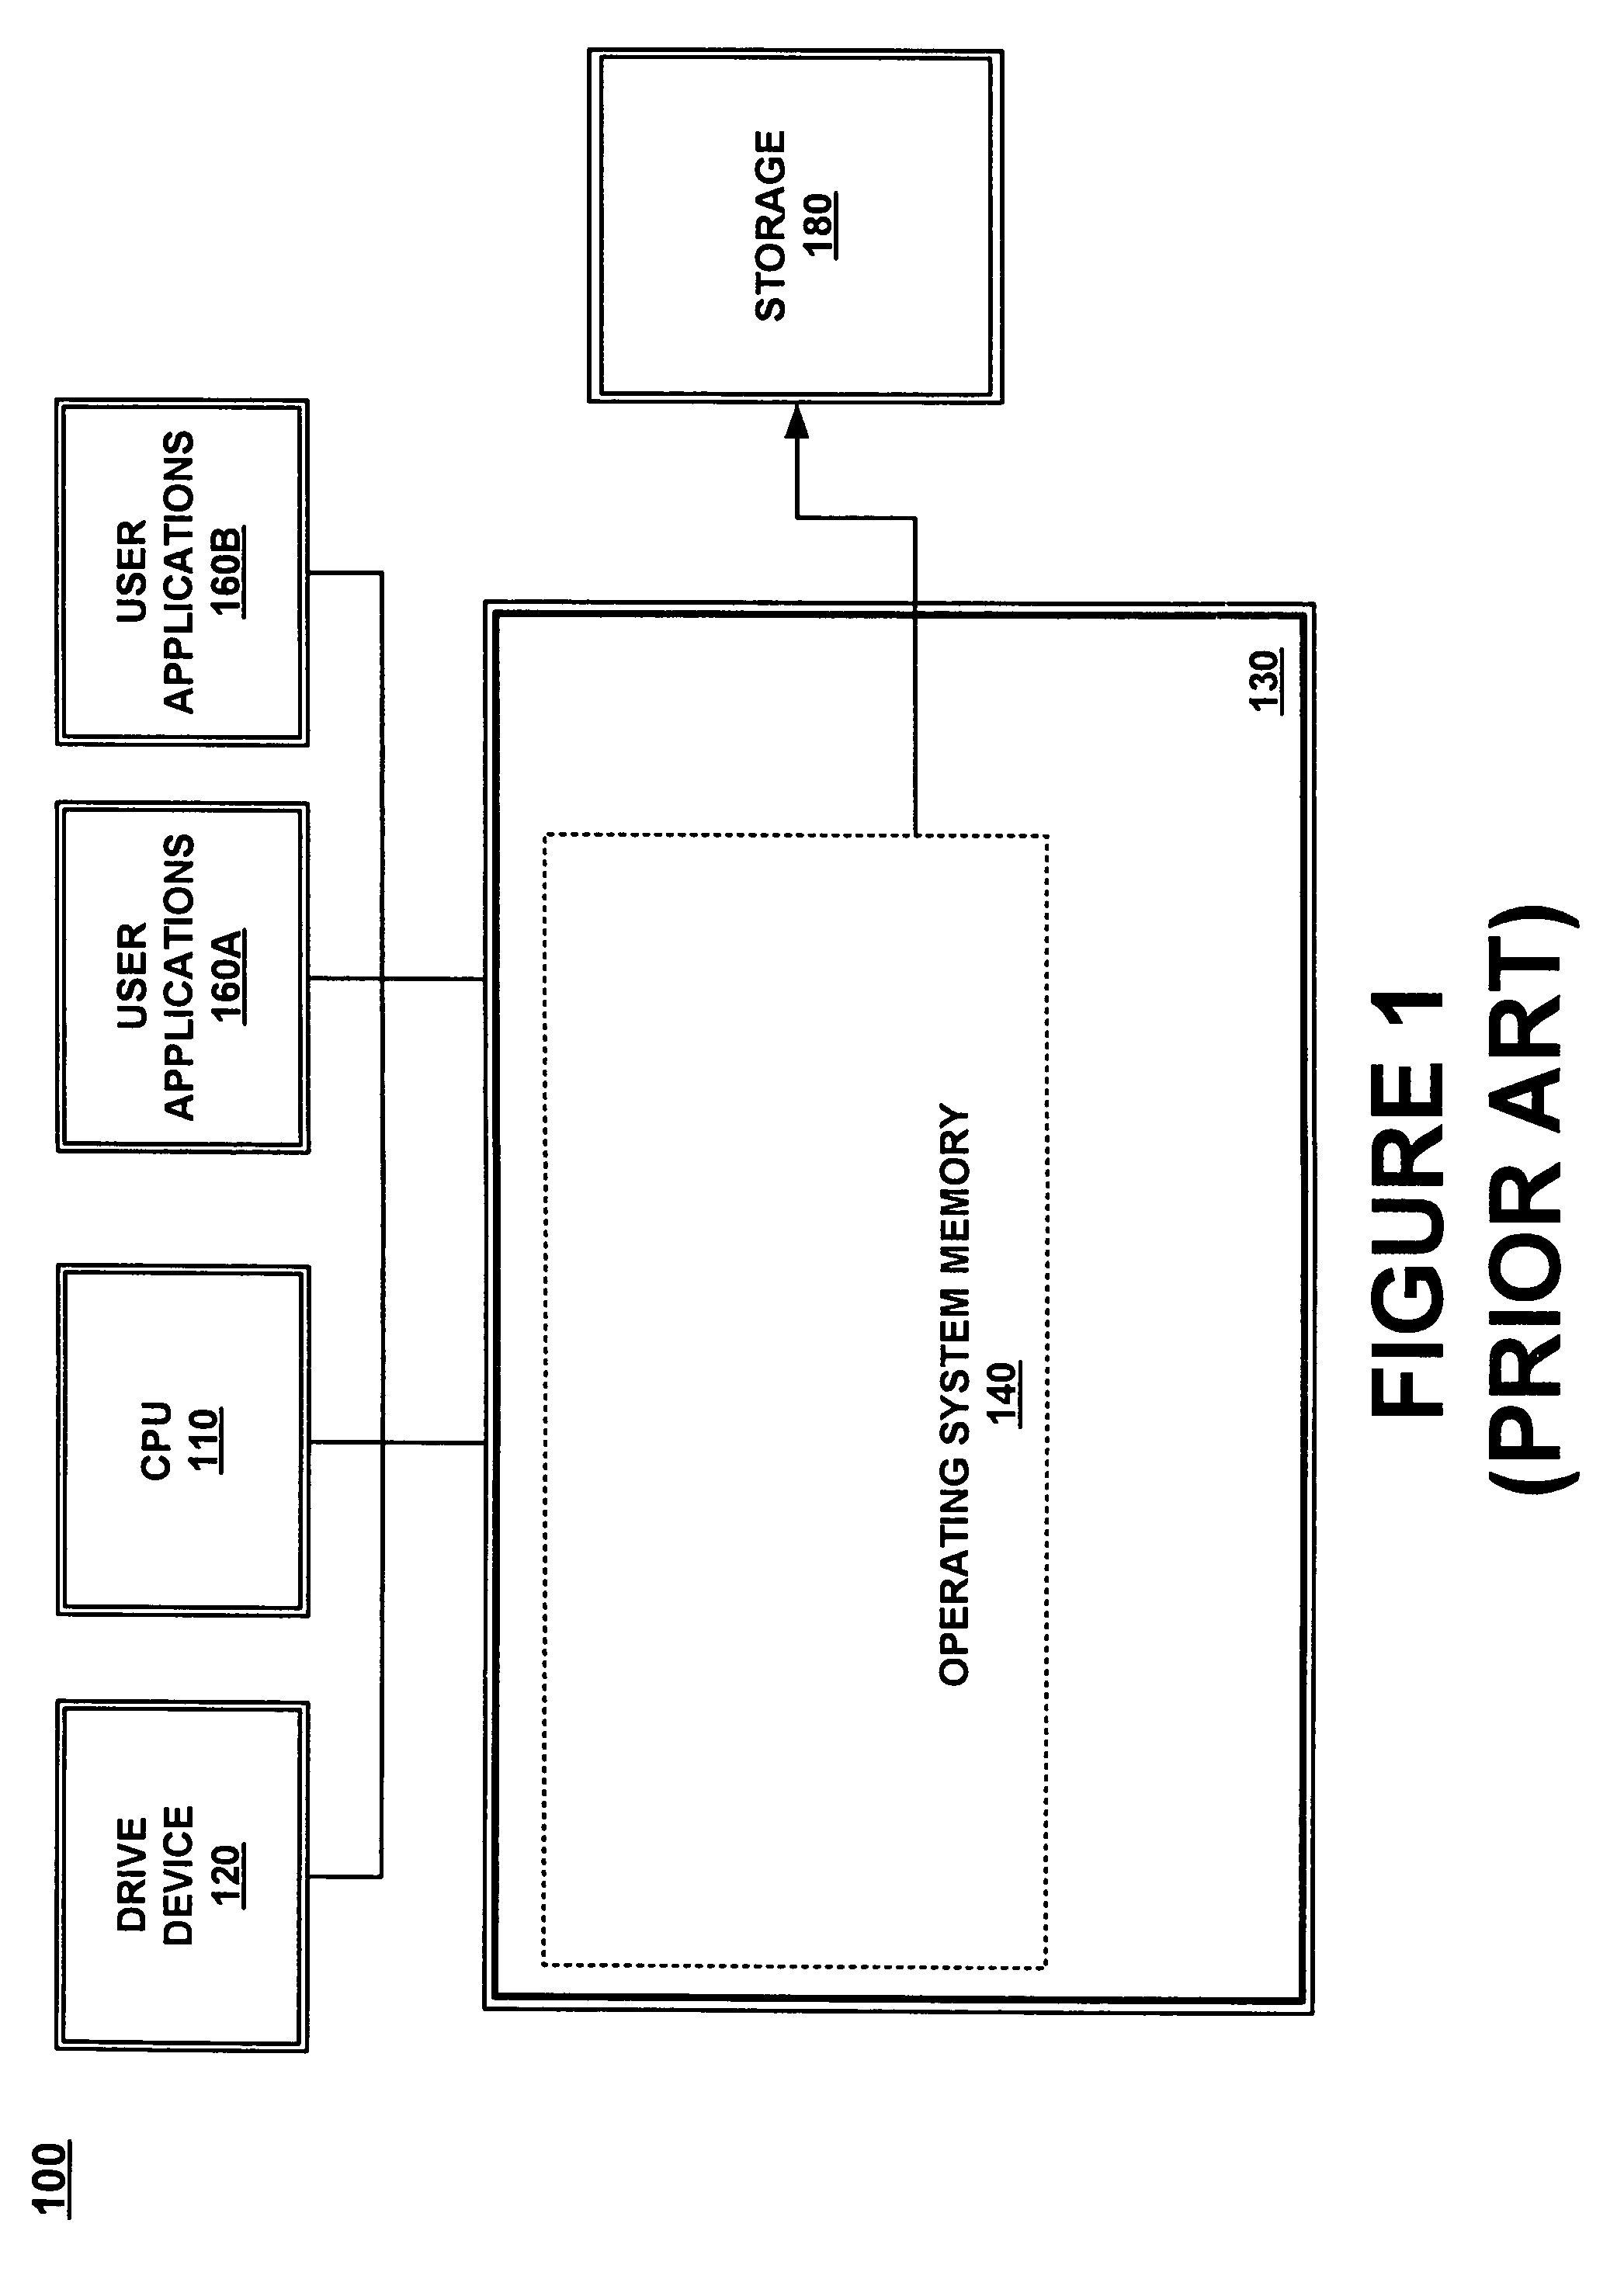 Compact type format data system and method